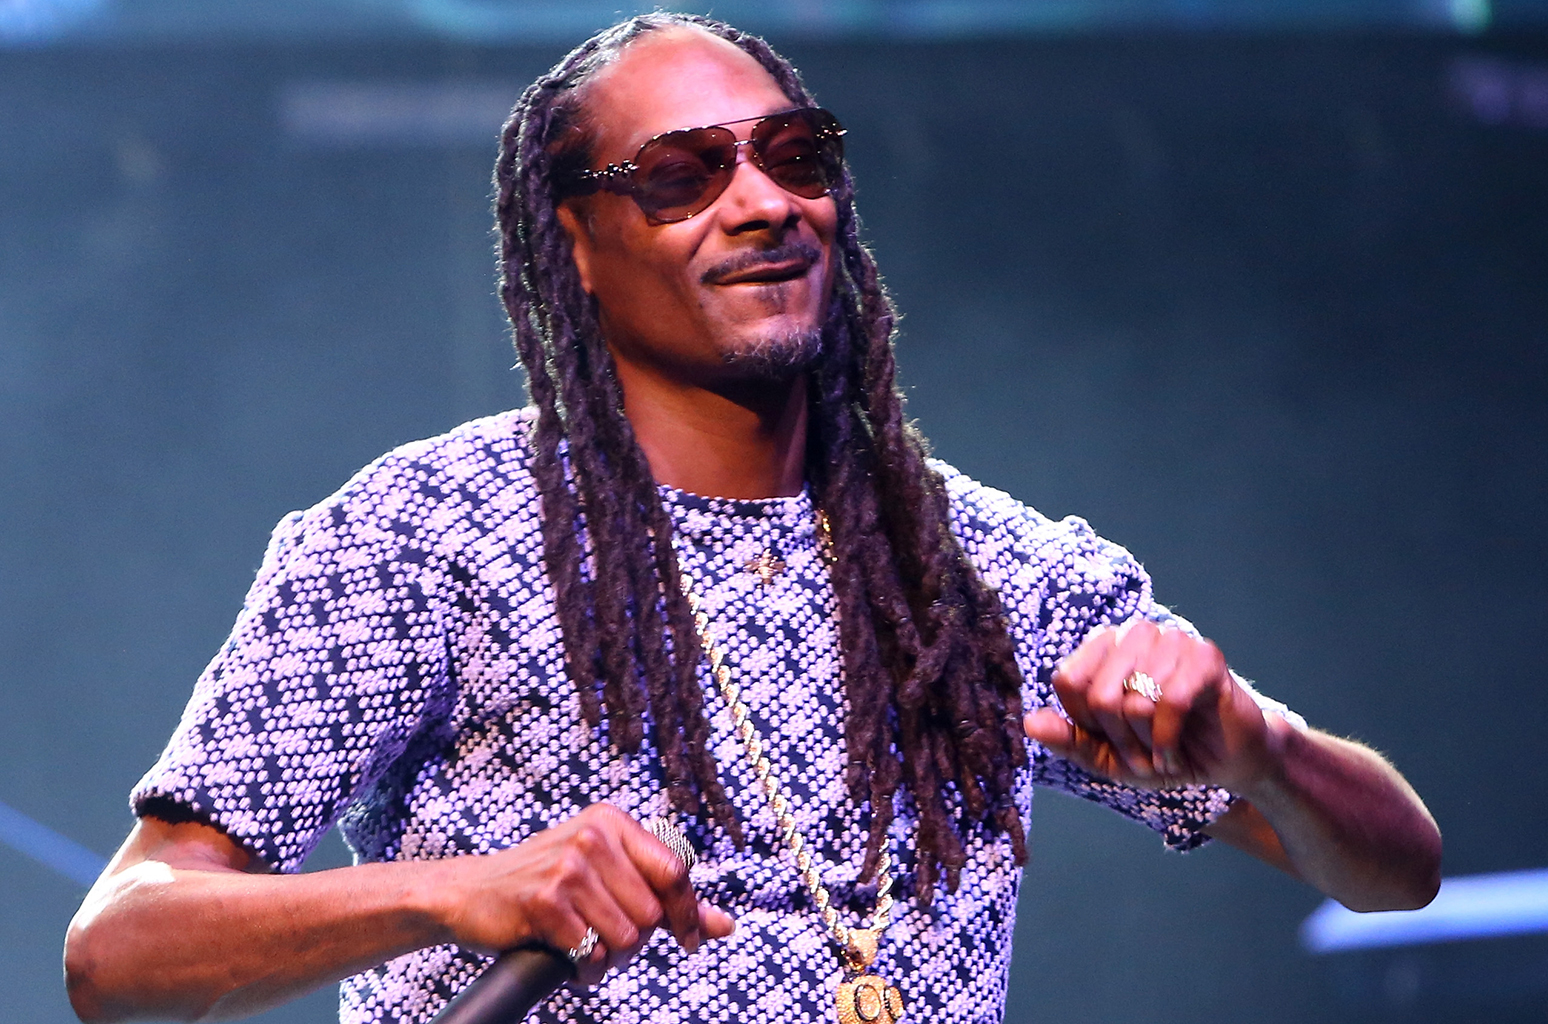 Snoop Dogg Shocked By Gay Scene in Recent Episode of ‘Power Book II: Ghost’